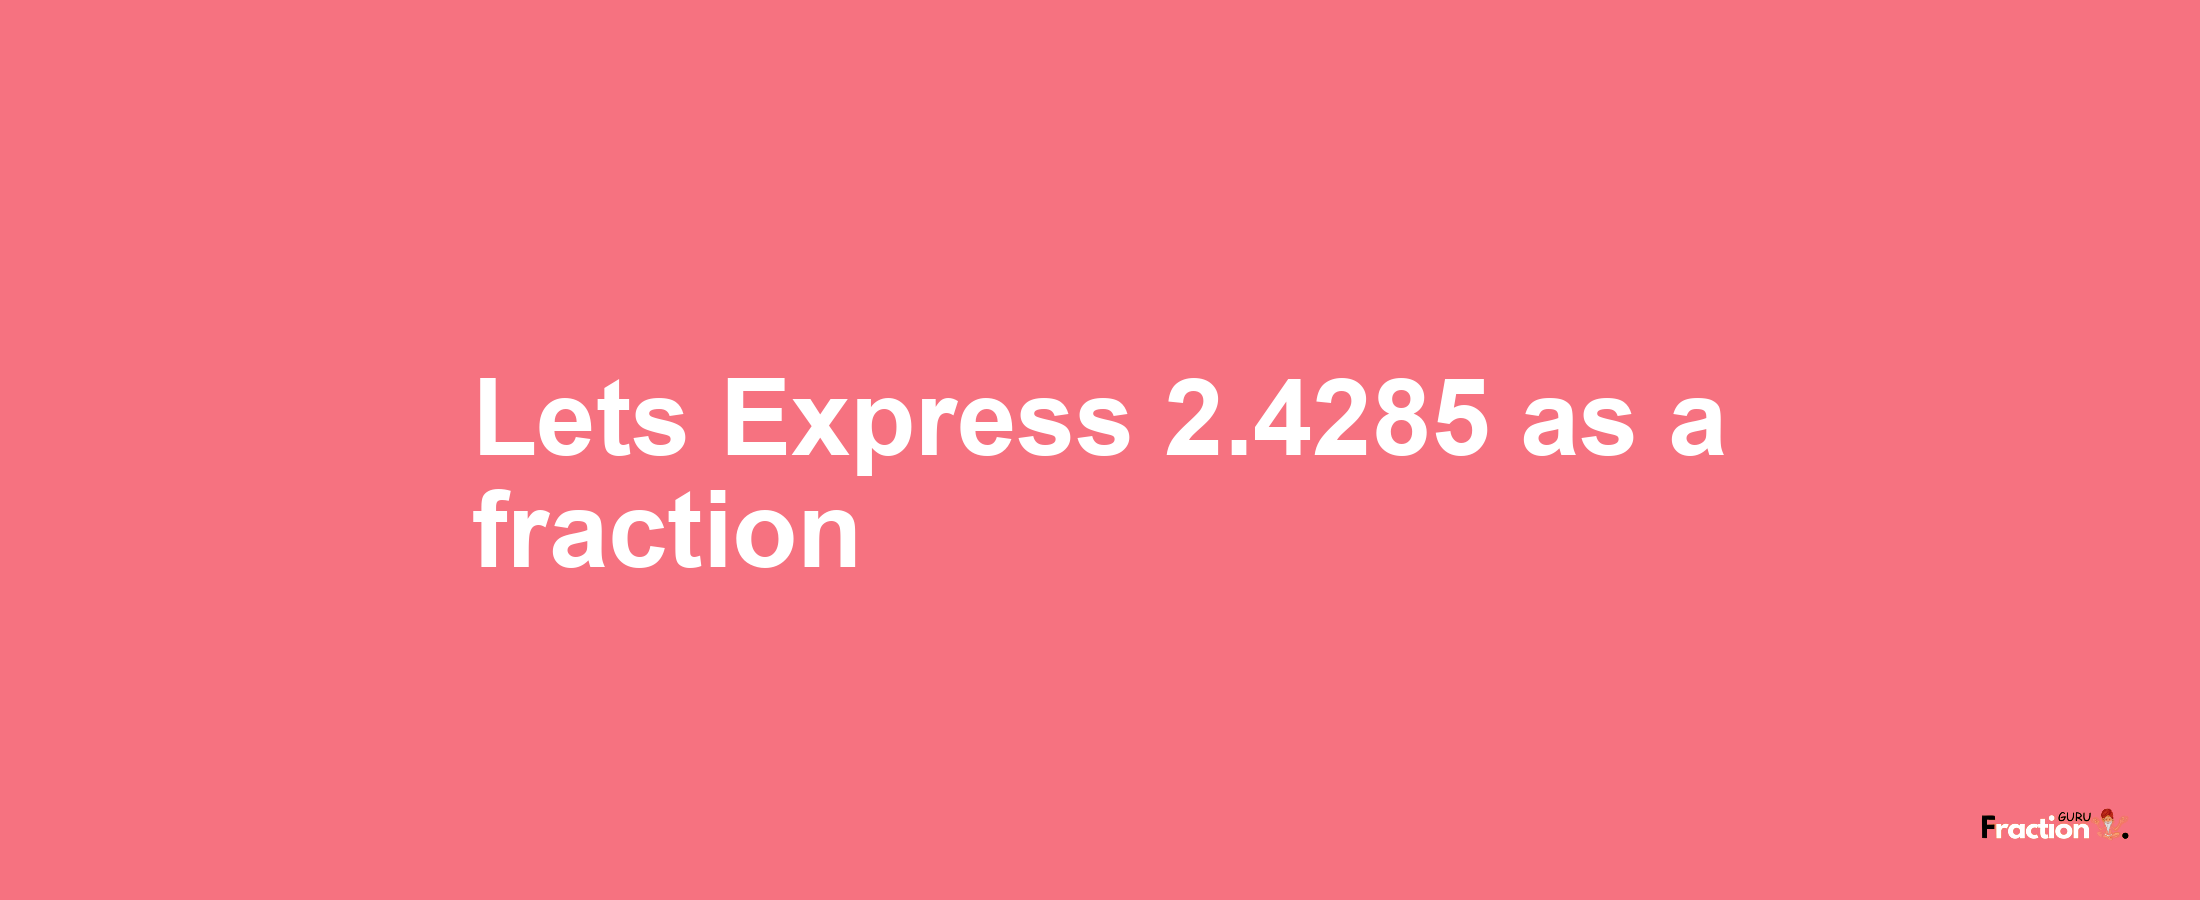 Lets Express 2.4285 as afraction